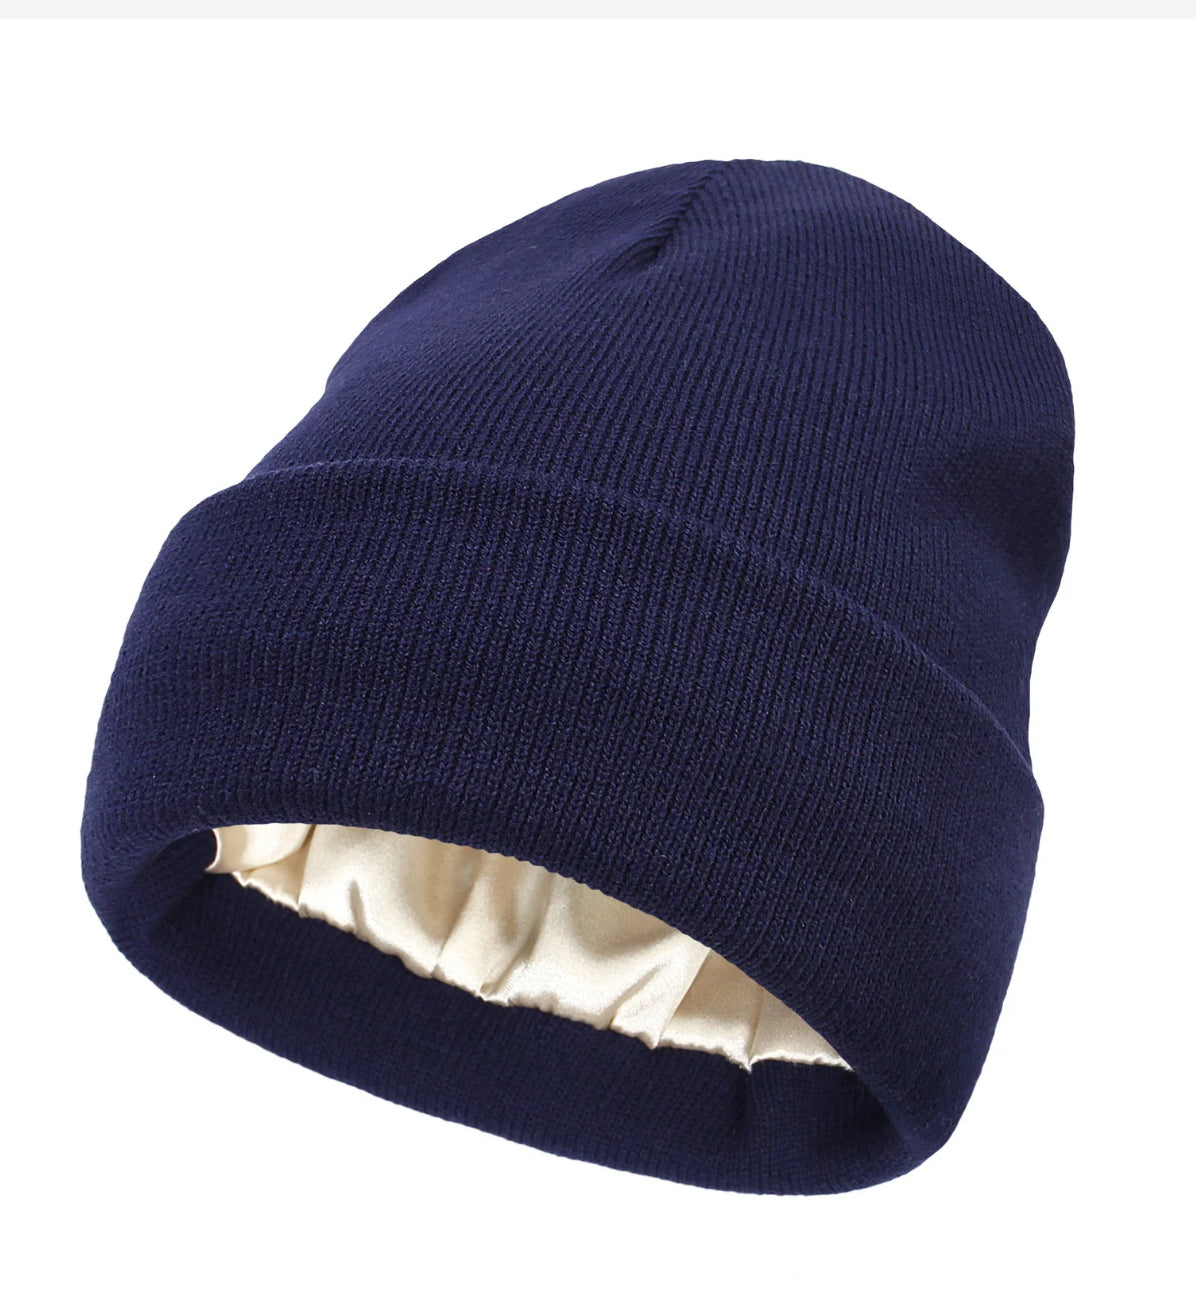 Satin Lined Toques